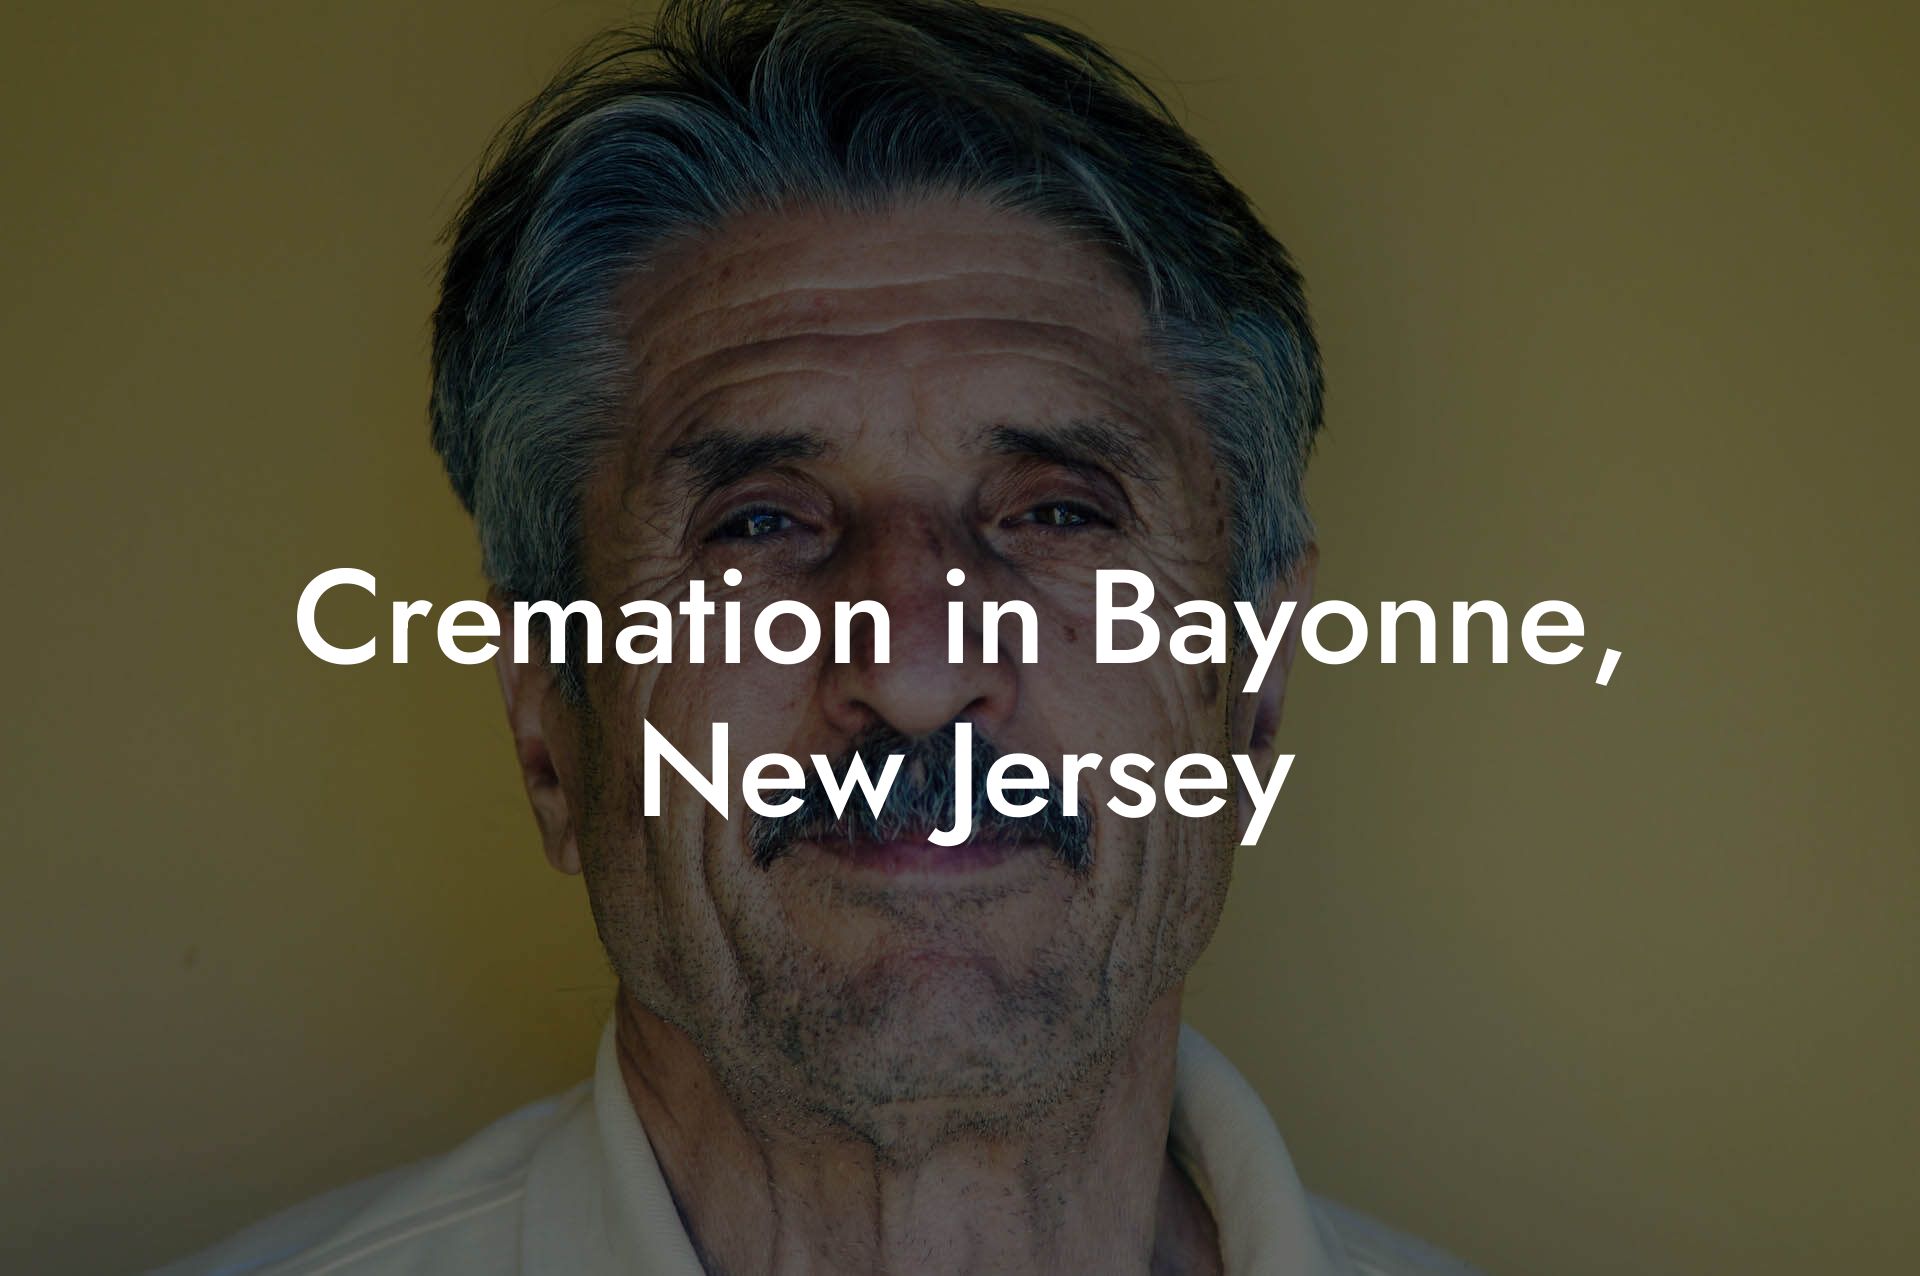 Cremation in Bayonne, New Jersey